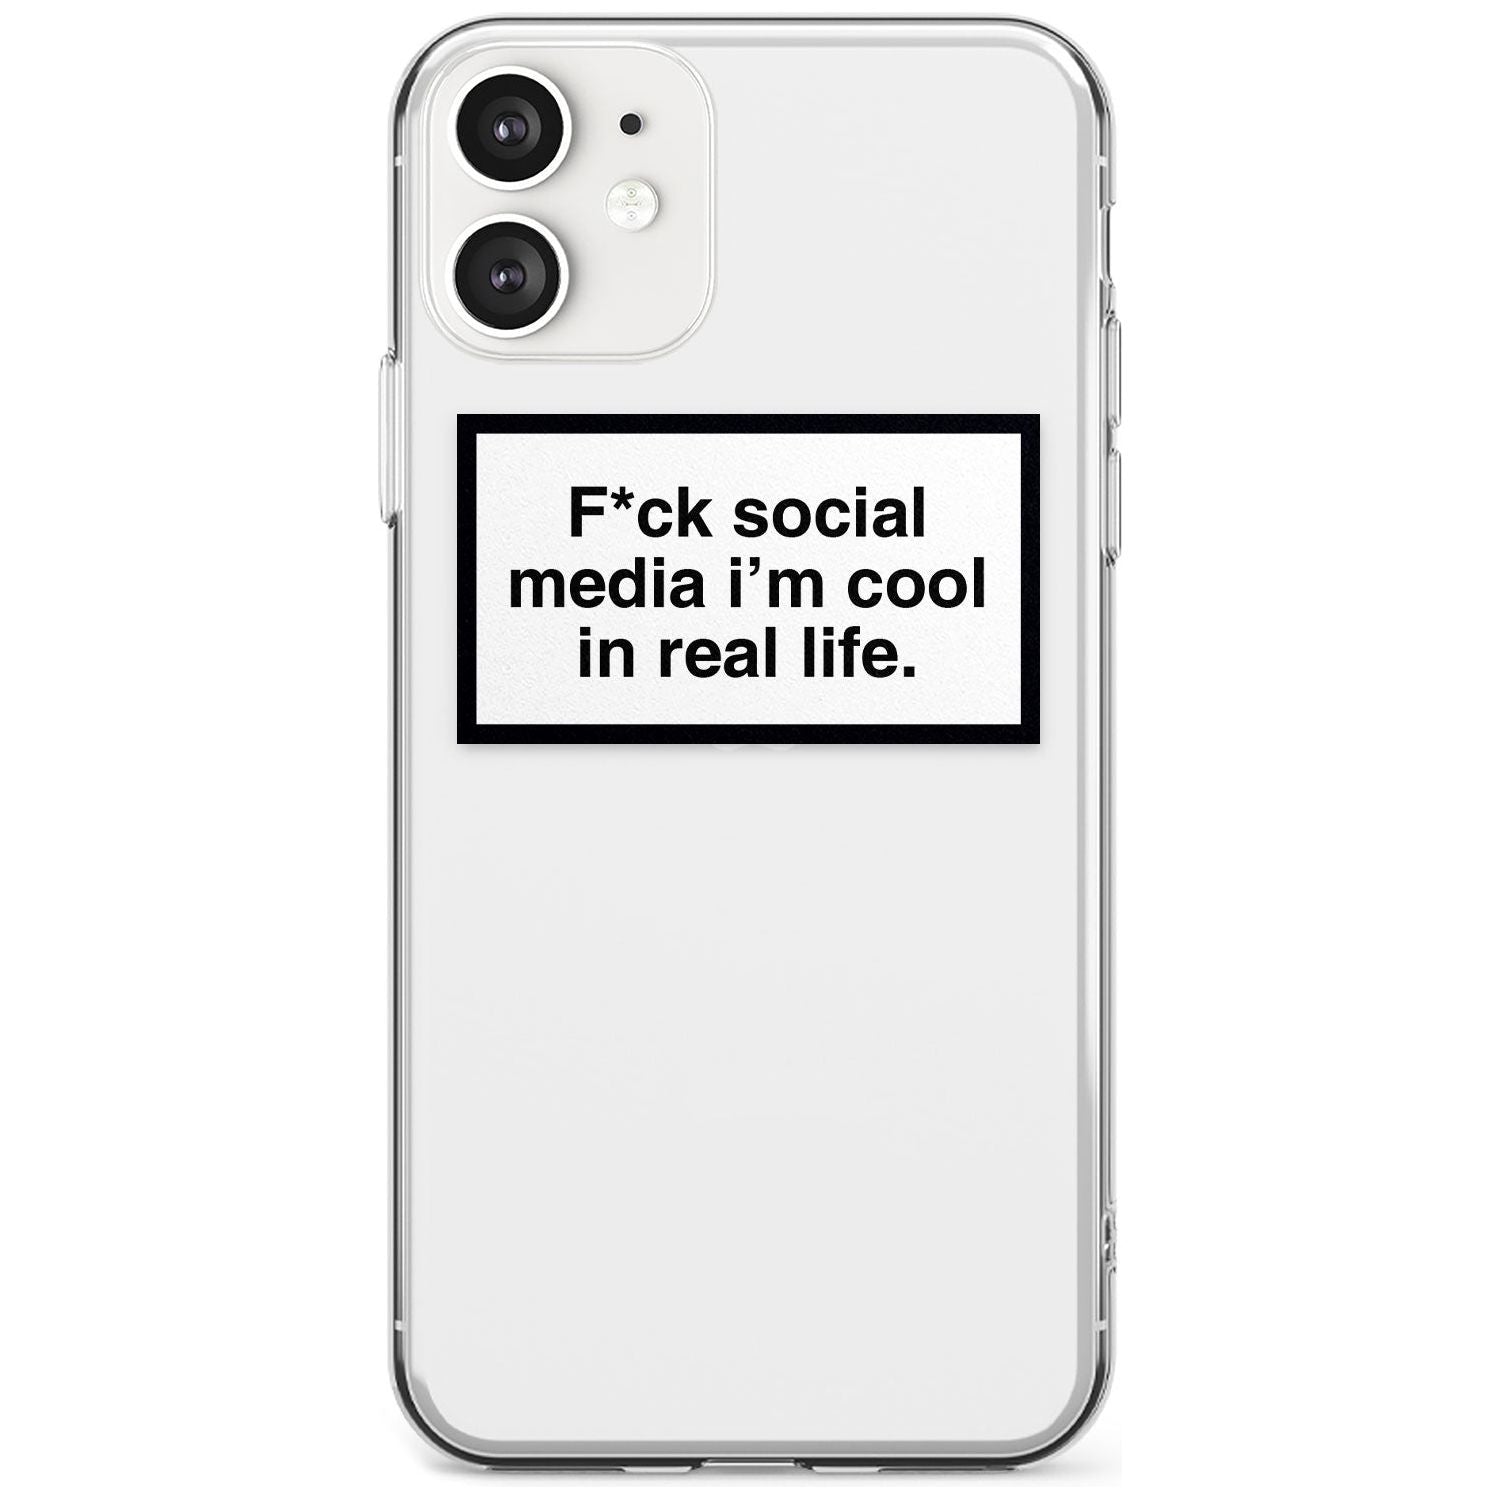 F*ck social media I'm cool in real life Black Impact Phone Case for iPhone 11